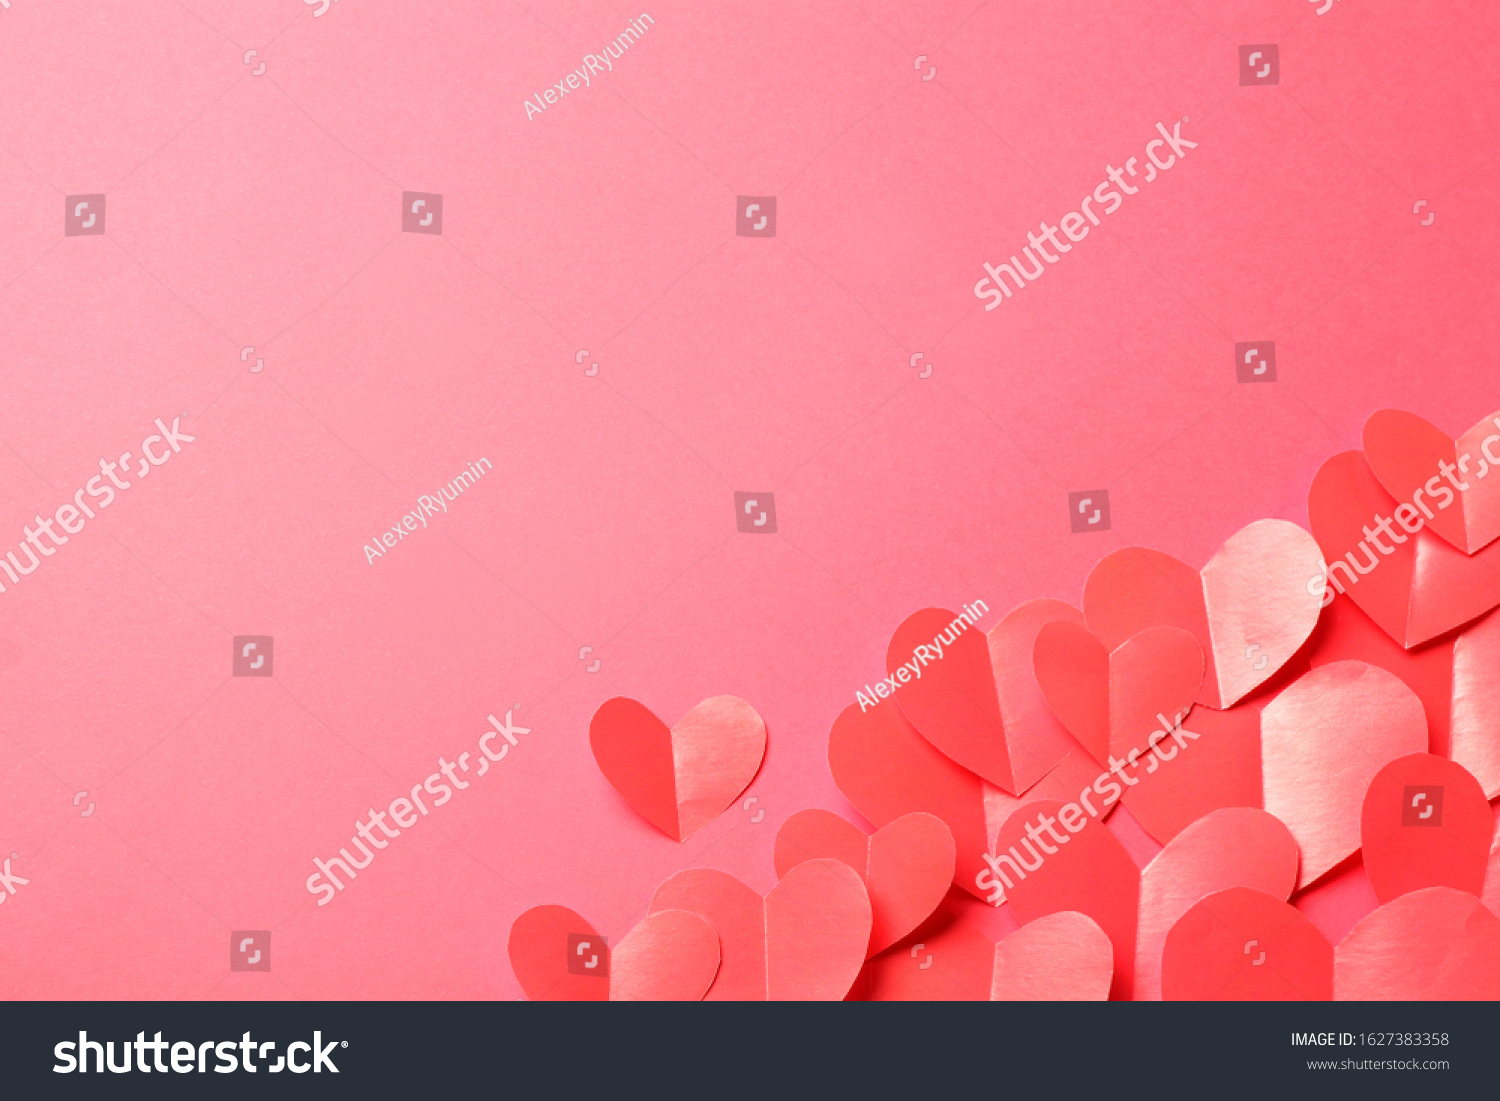 Cut out of red paper hearts on pink background. Good Valentines day, Womans day, love, romantic or wedding composition with empty space for custom text for banner, congratulation, card, offer, flyer, advertising, invitation.